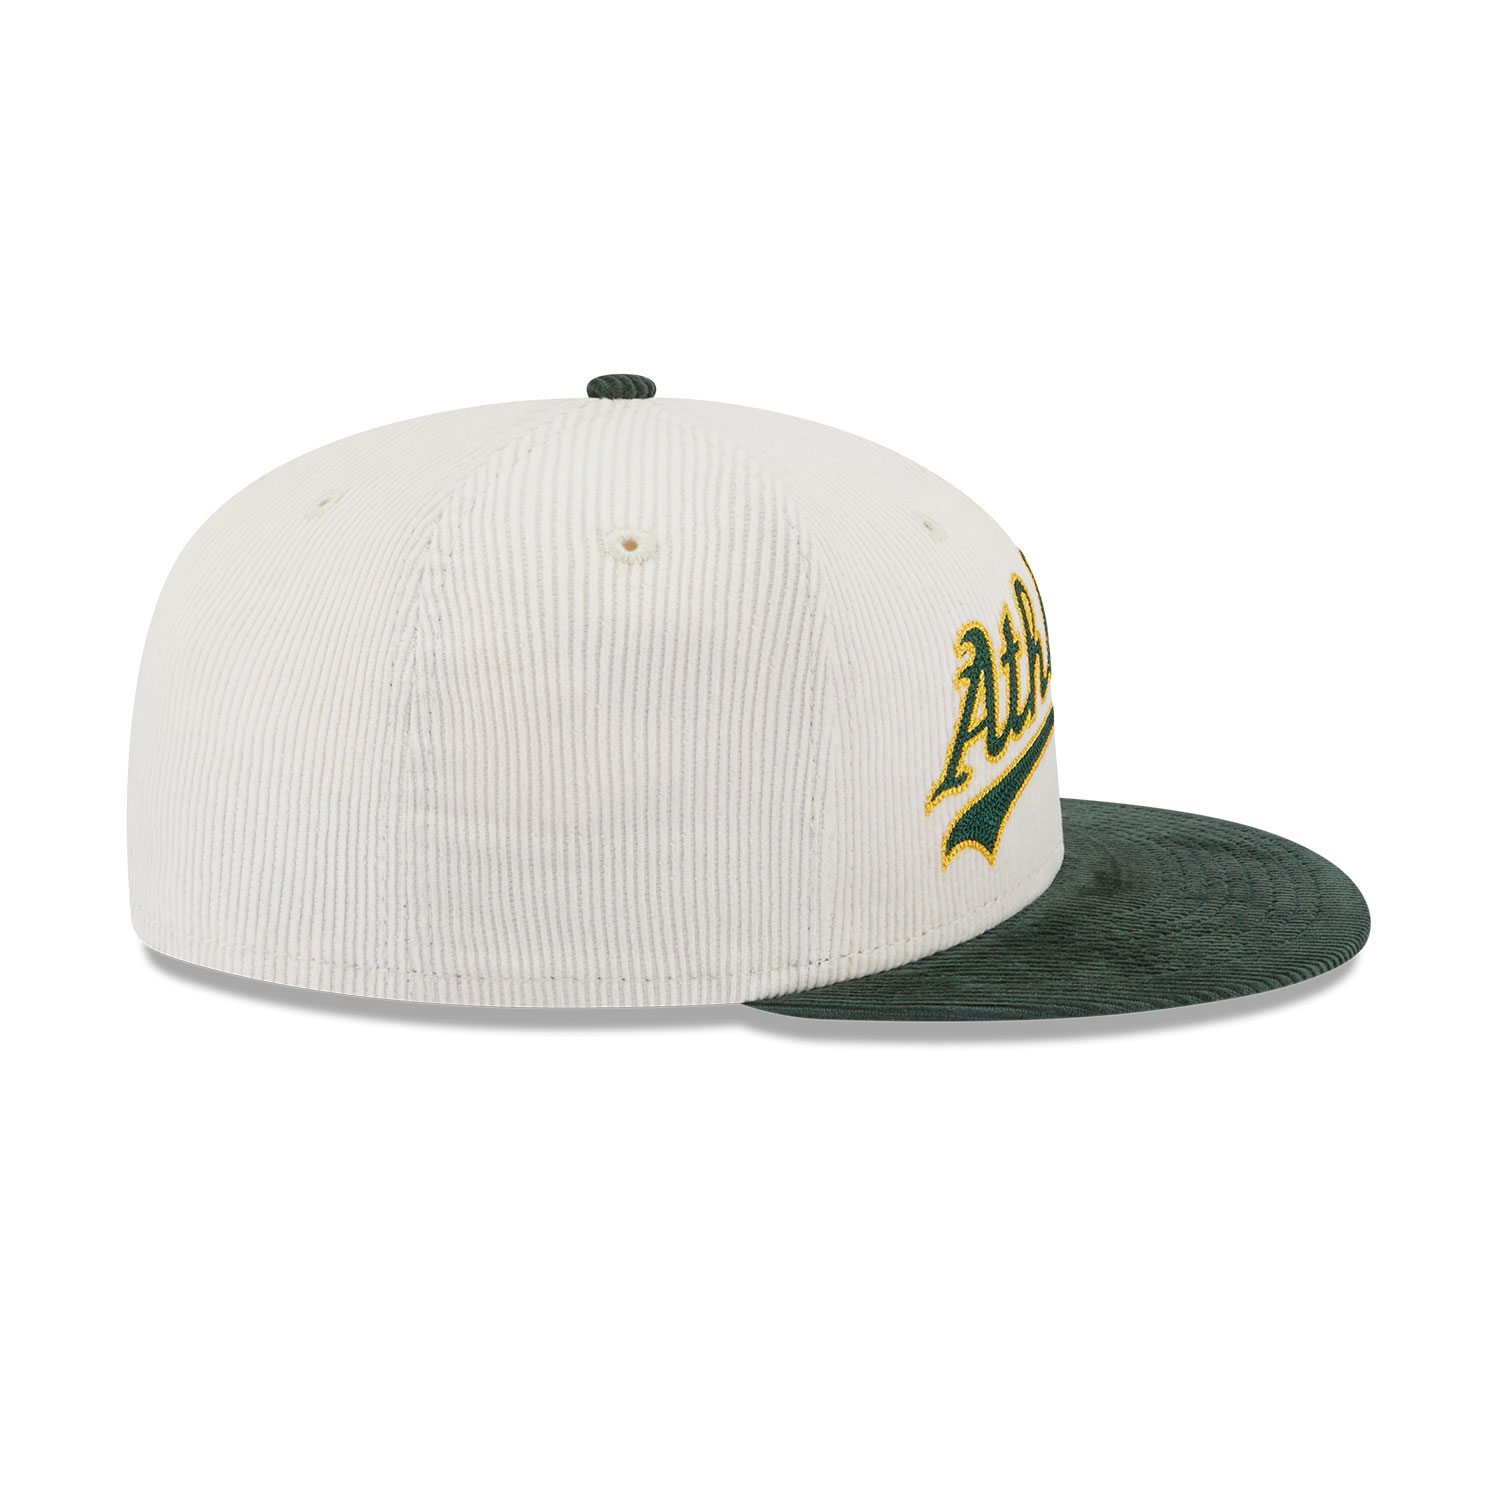 oakland a's snapback mitchell and ness